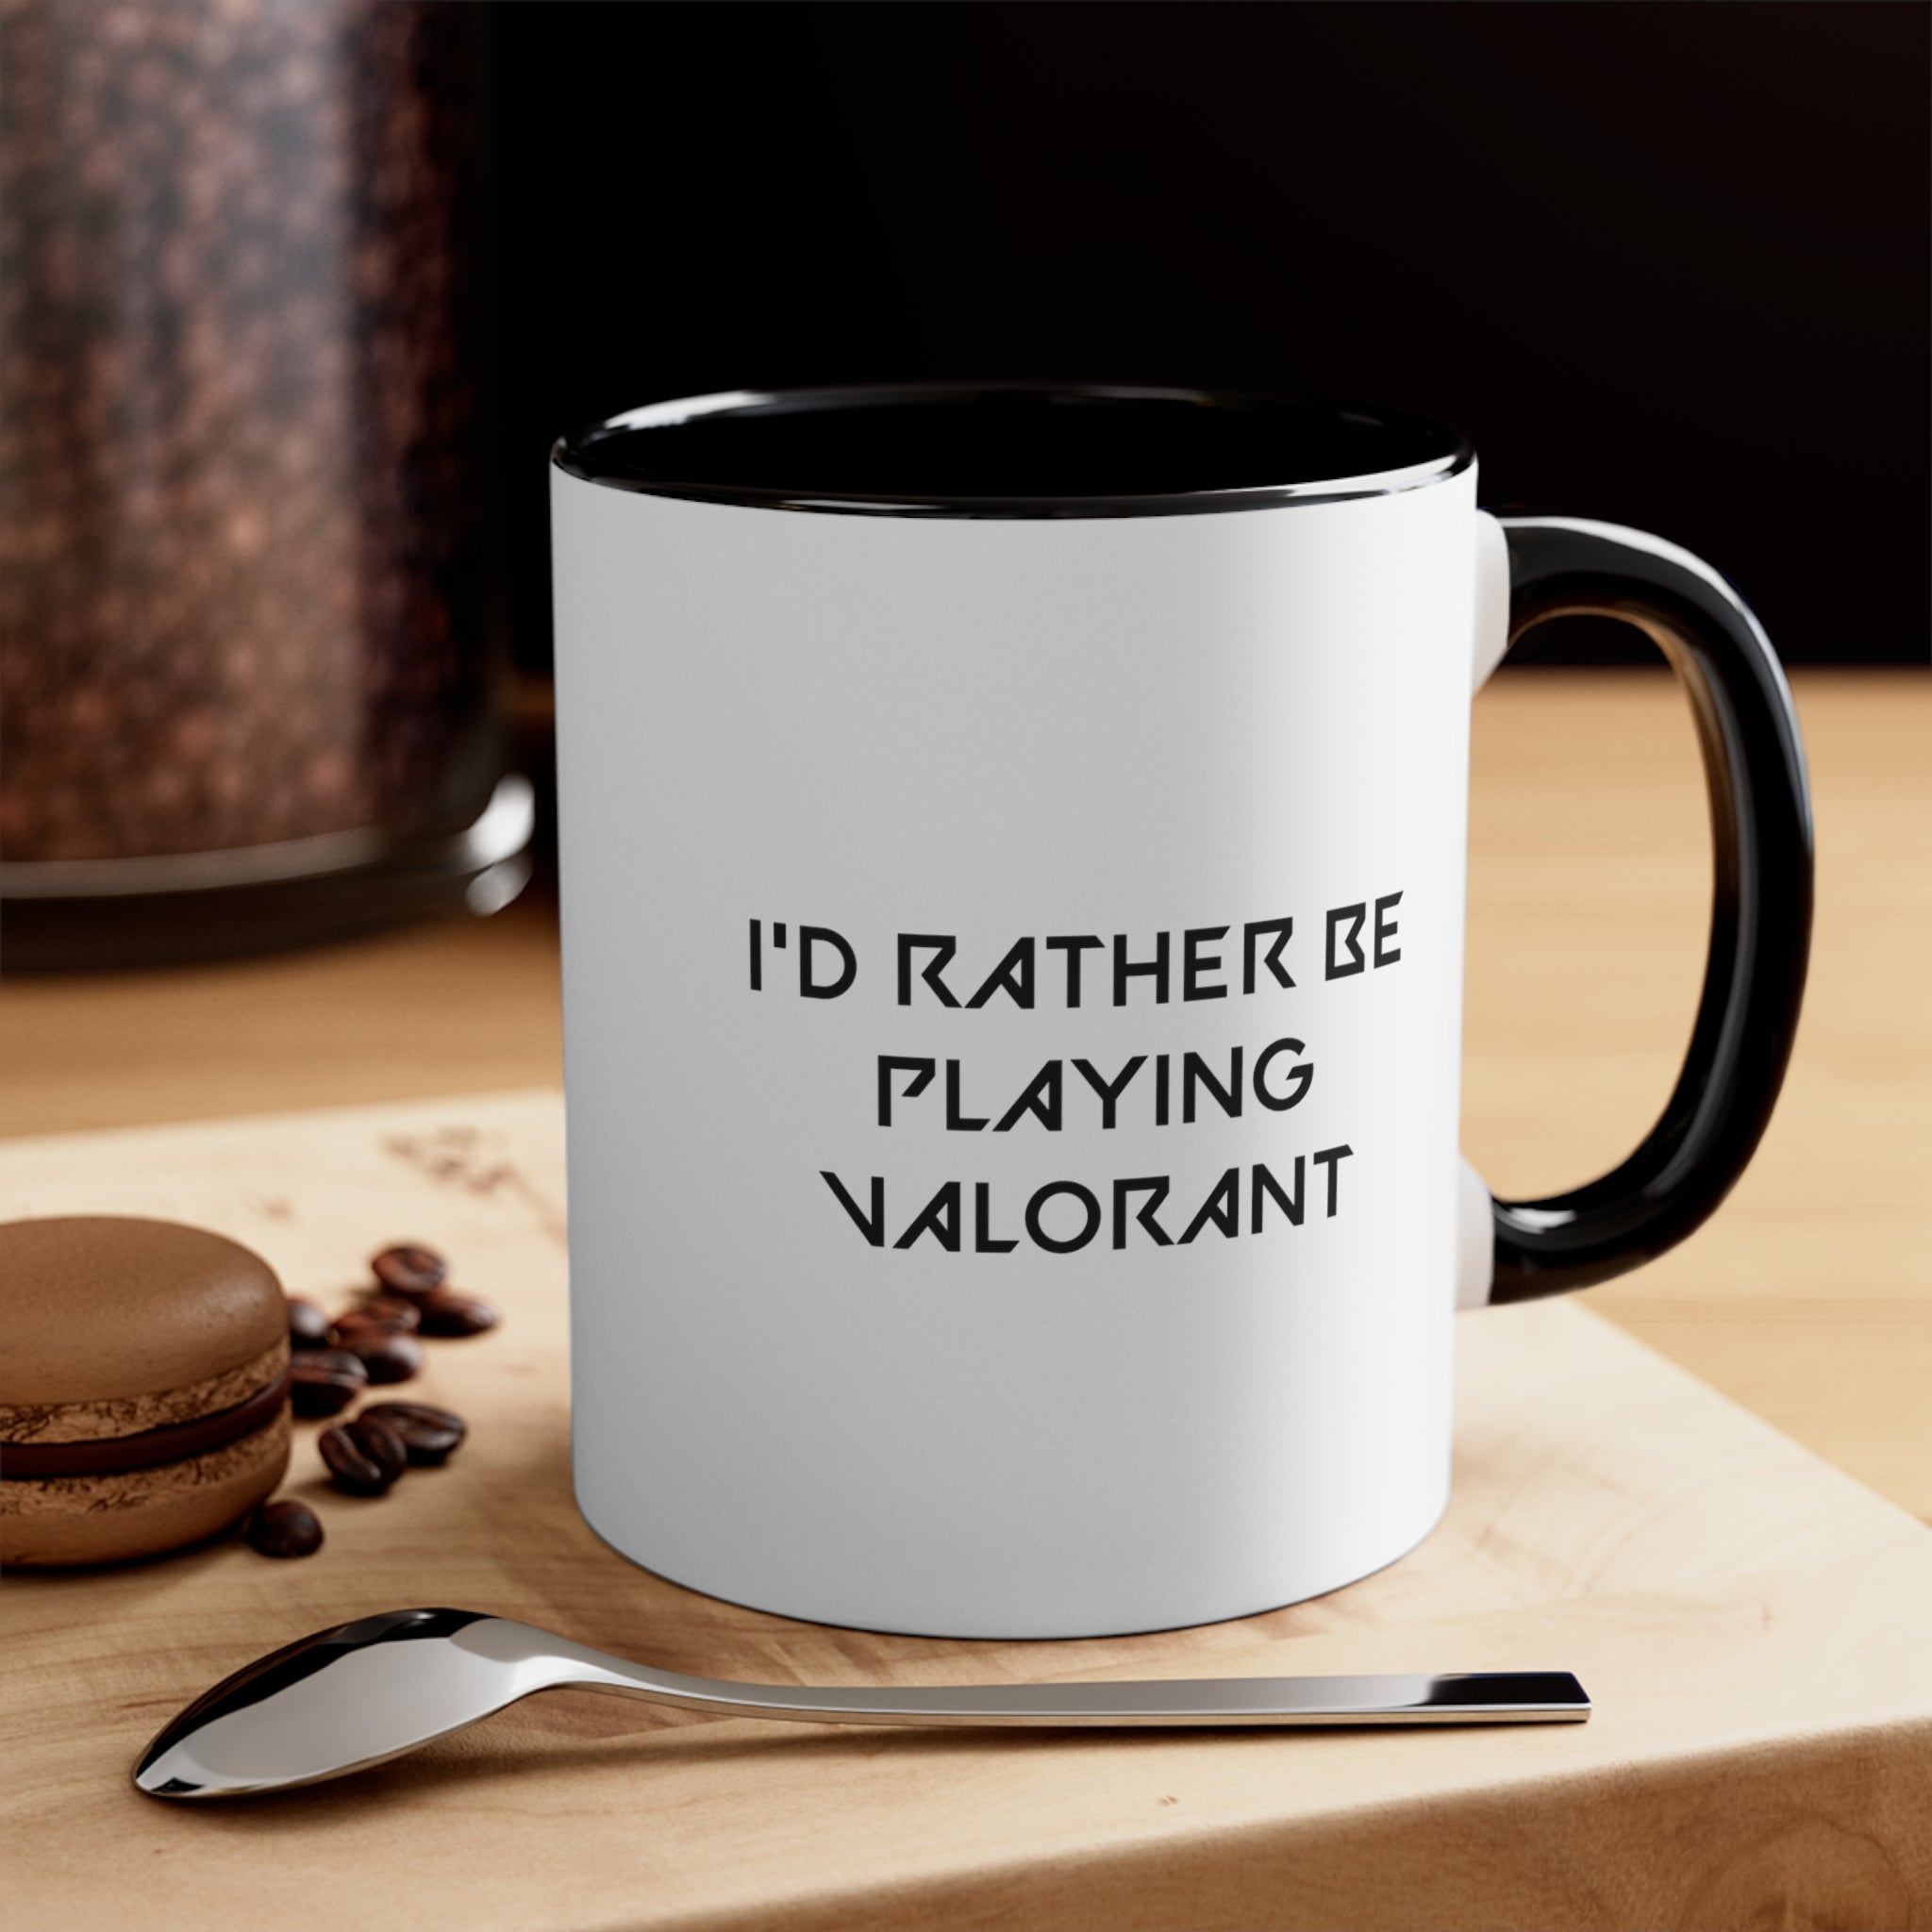 Valorant I'd Rather Be Playing Coffee Mug, 11oz Mugs Cups Gamer Gift For Him Her Game Cup Cups Mugs Birthday Christmas Valentine's Anniversary Gifts